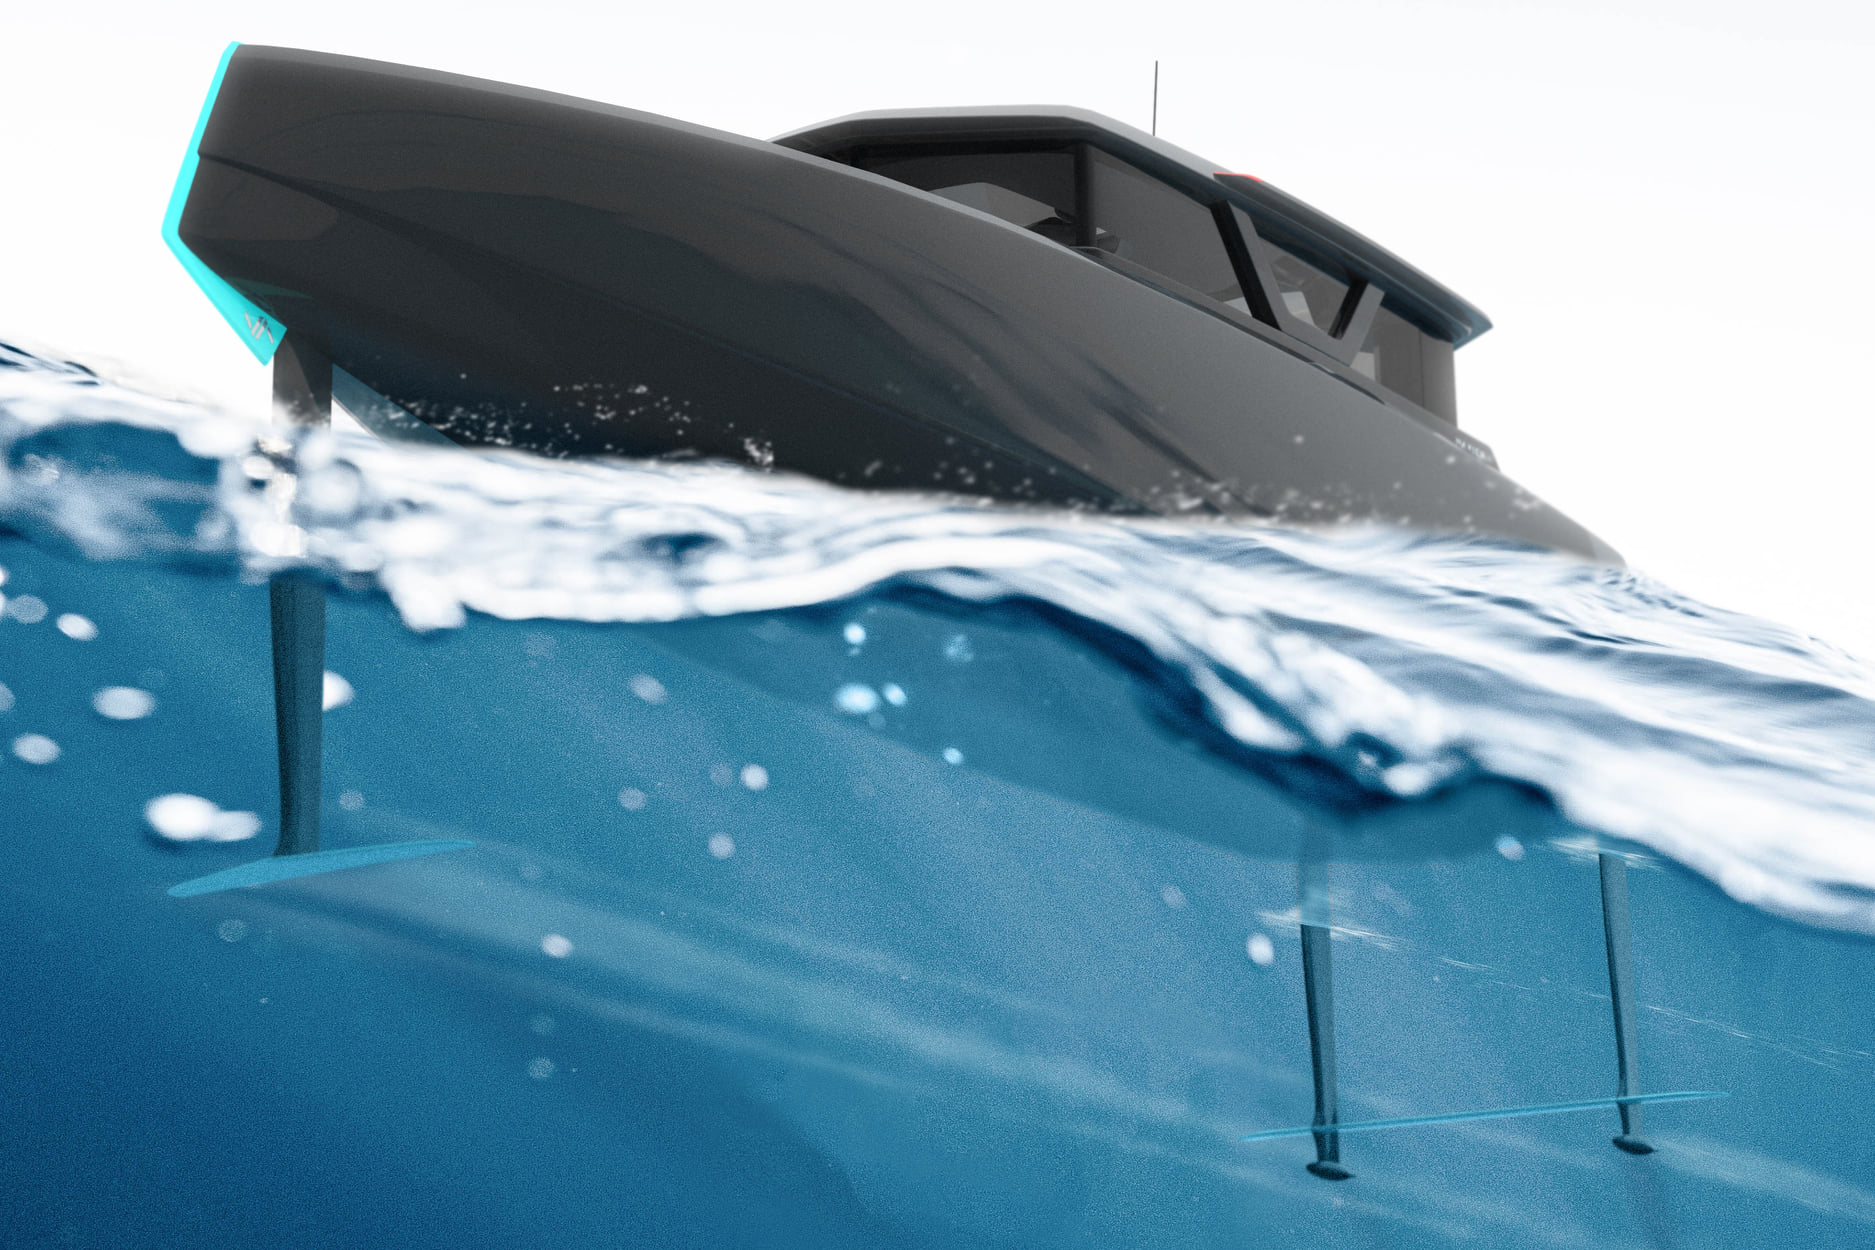 Navier's N30 All-Electric Hydrofoil Boat Is Here To Usher In a New Era ...